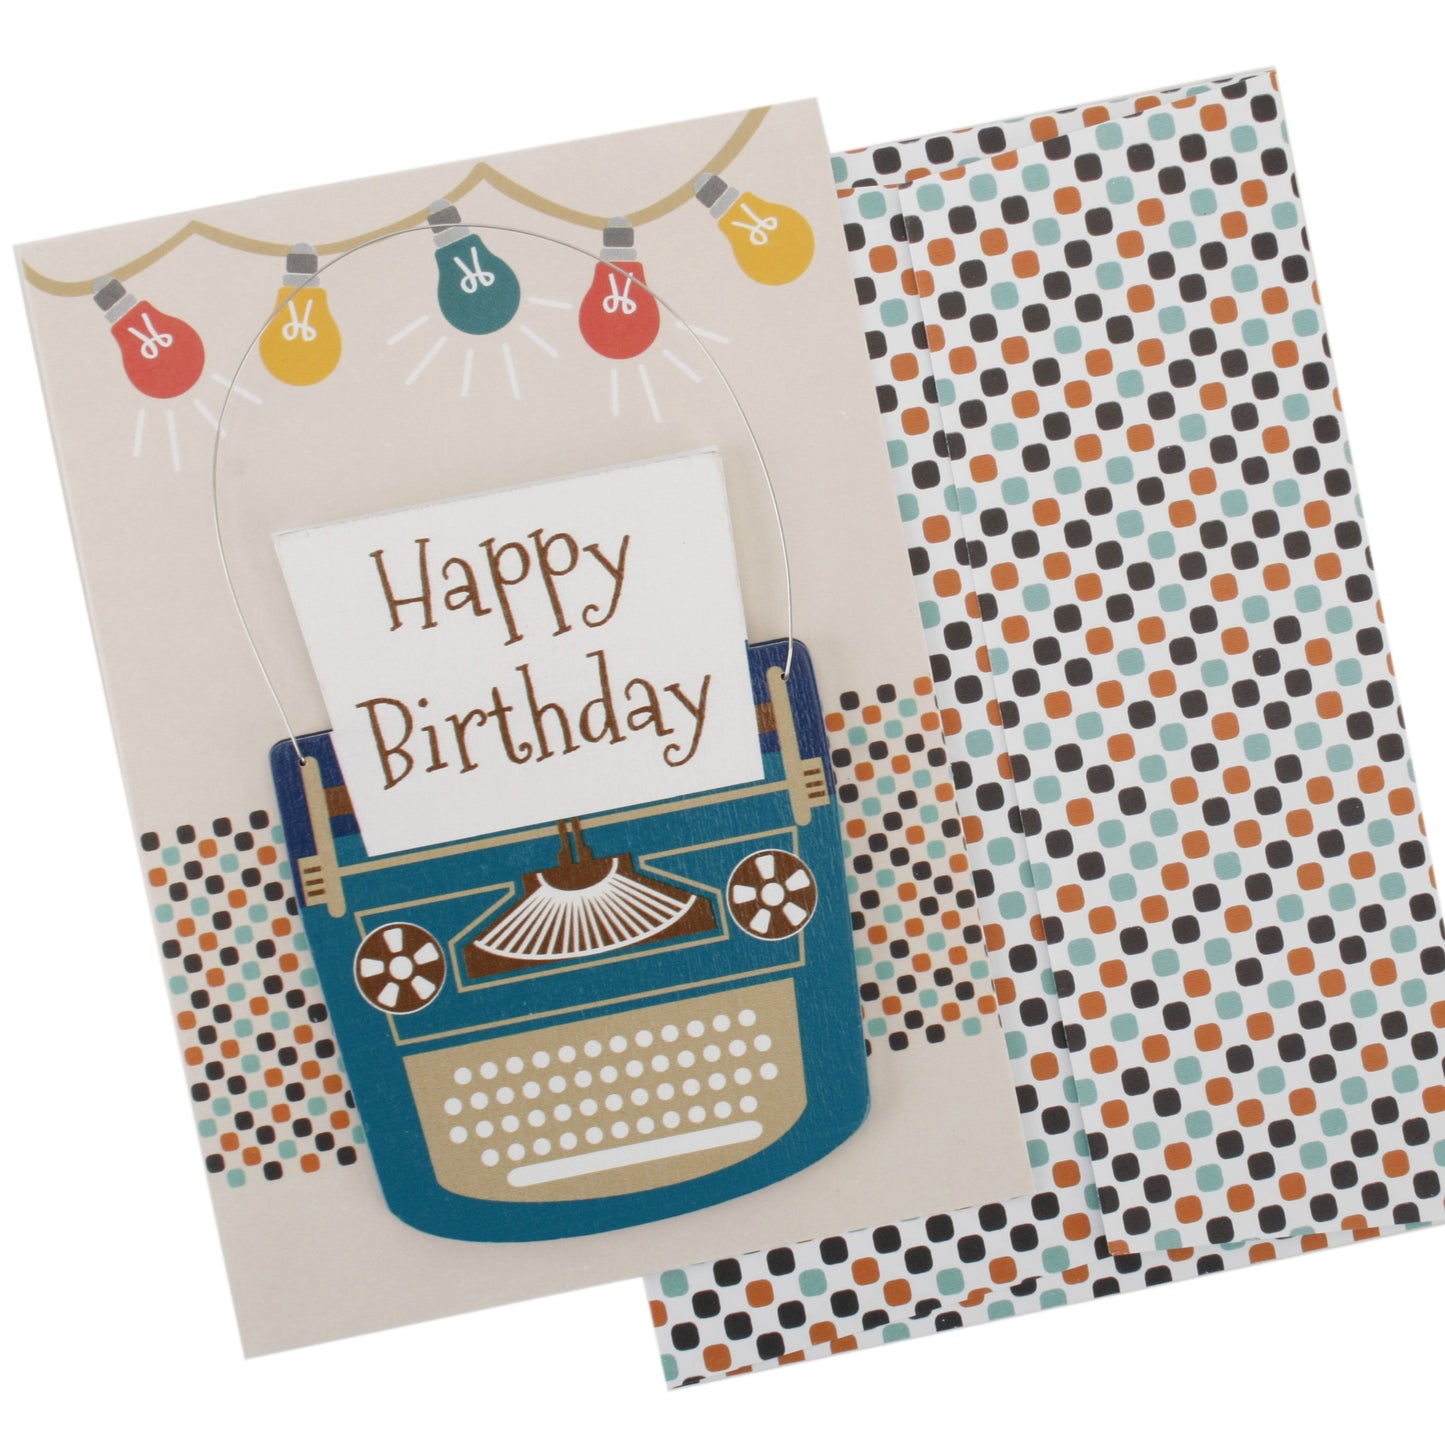 Happy Birthday Card and Envelope